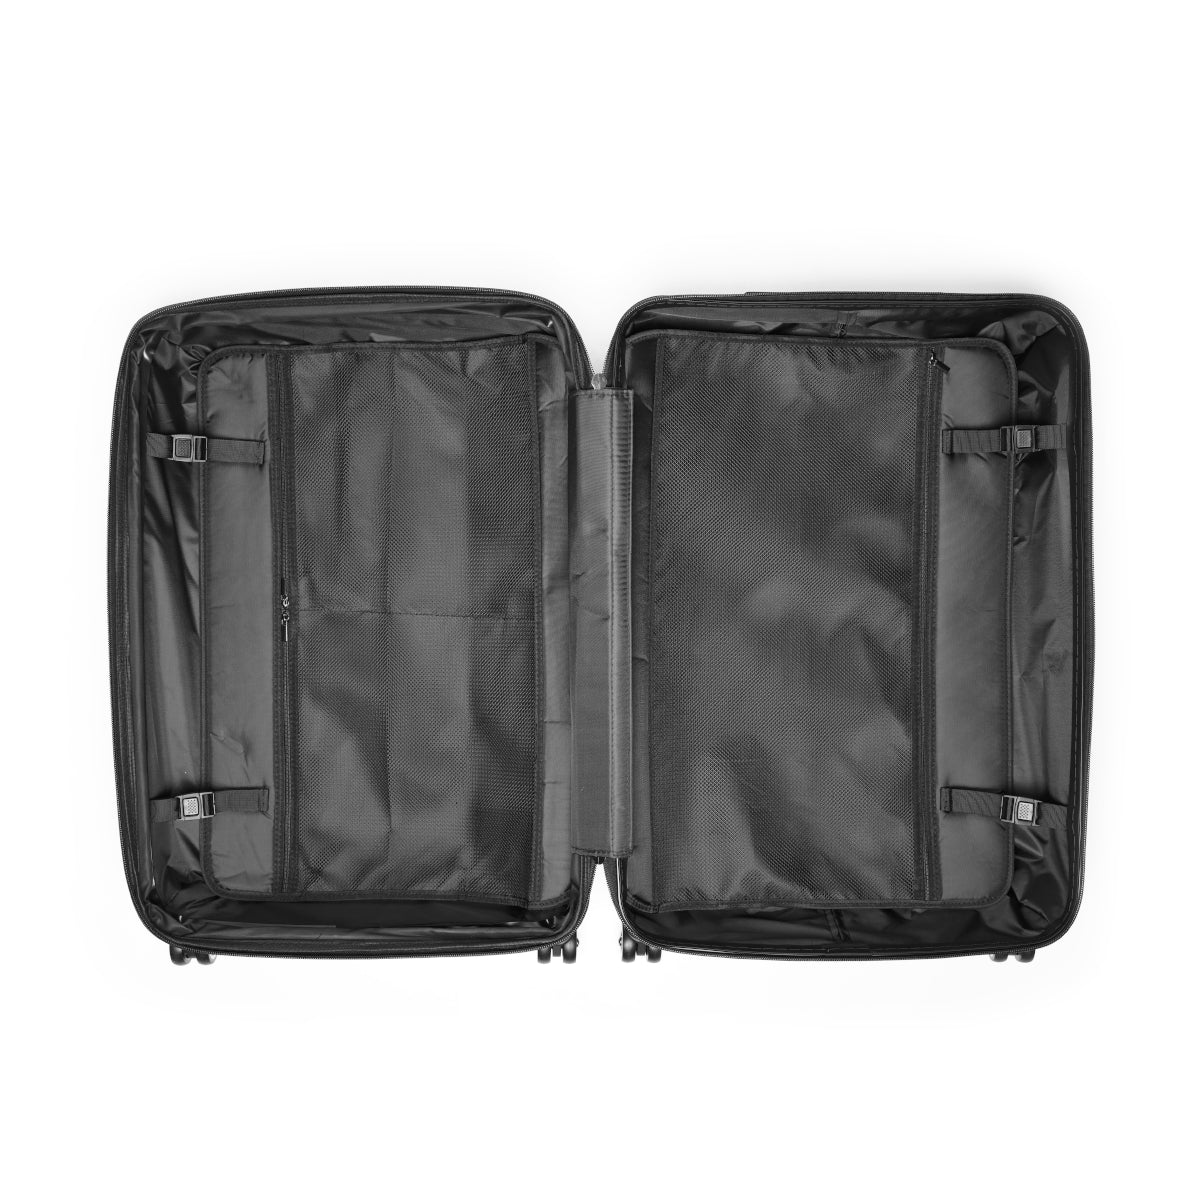  CABIN SUITCASE CARRY-ON LUGGAGE, HAND CARRY, SUMMER STYLE, SUMMER HOLIDAY BAG FOR MEN WOMEN, VACATION BAG